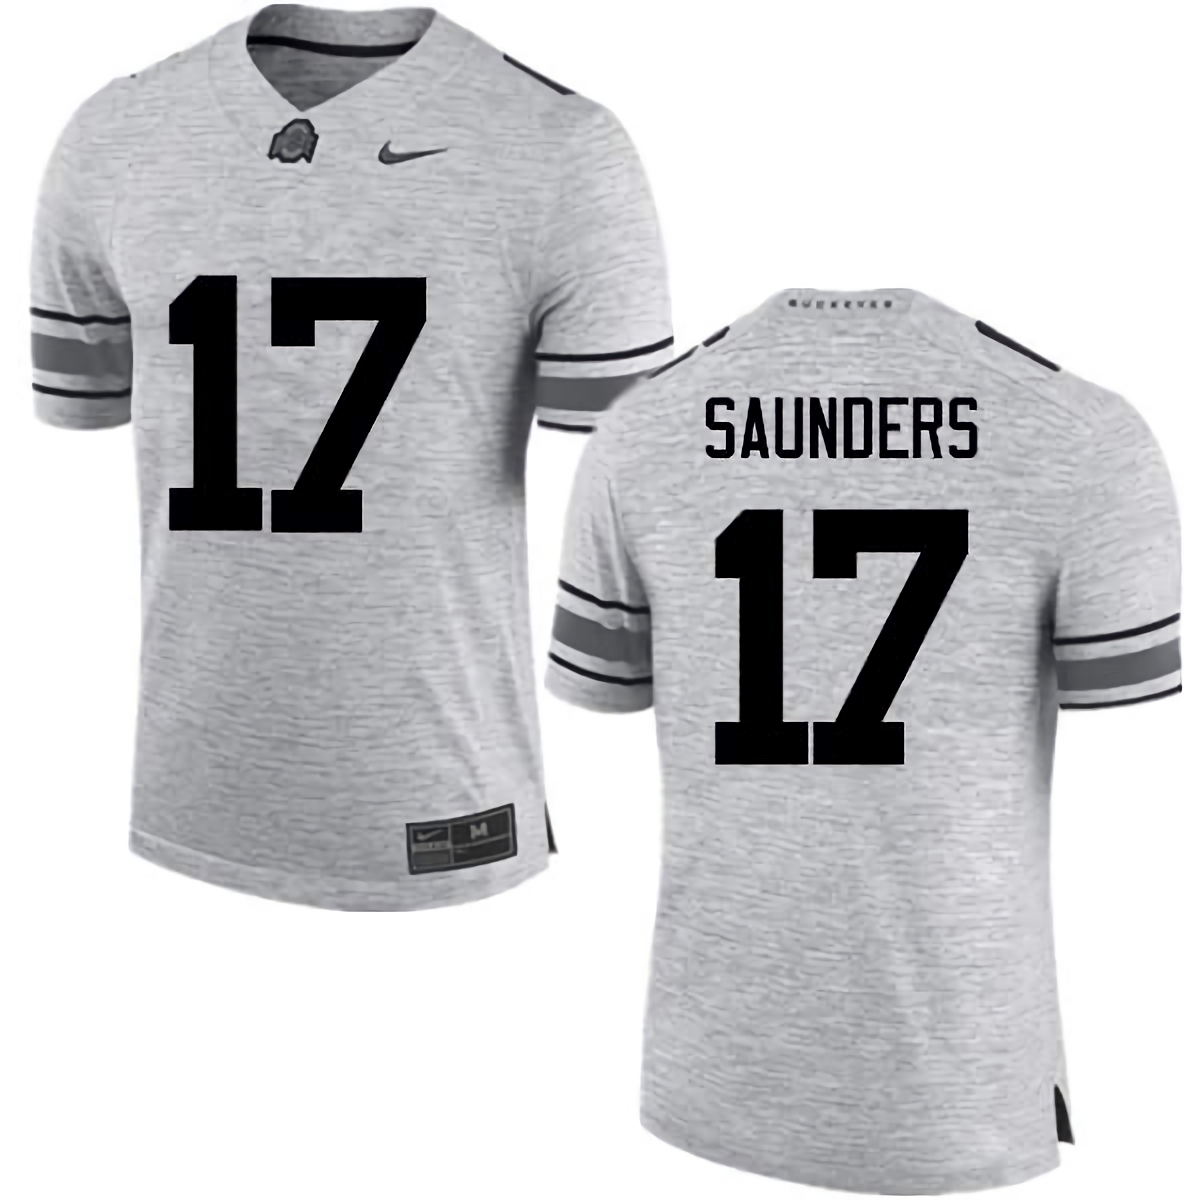 C.J. Saunders Ohio State Buckeyes Men's NCAA #17 Nike Gray College Stitched Football Jersey ZFH1356VX